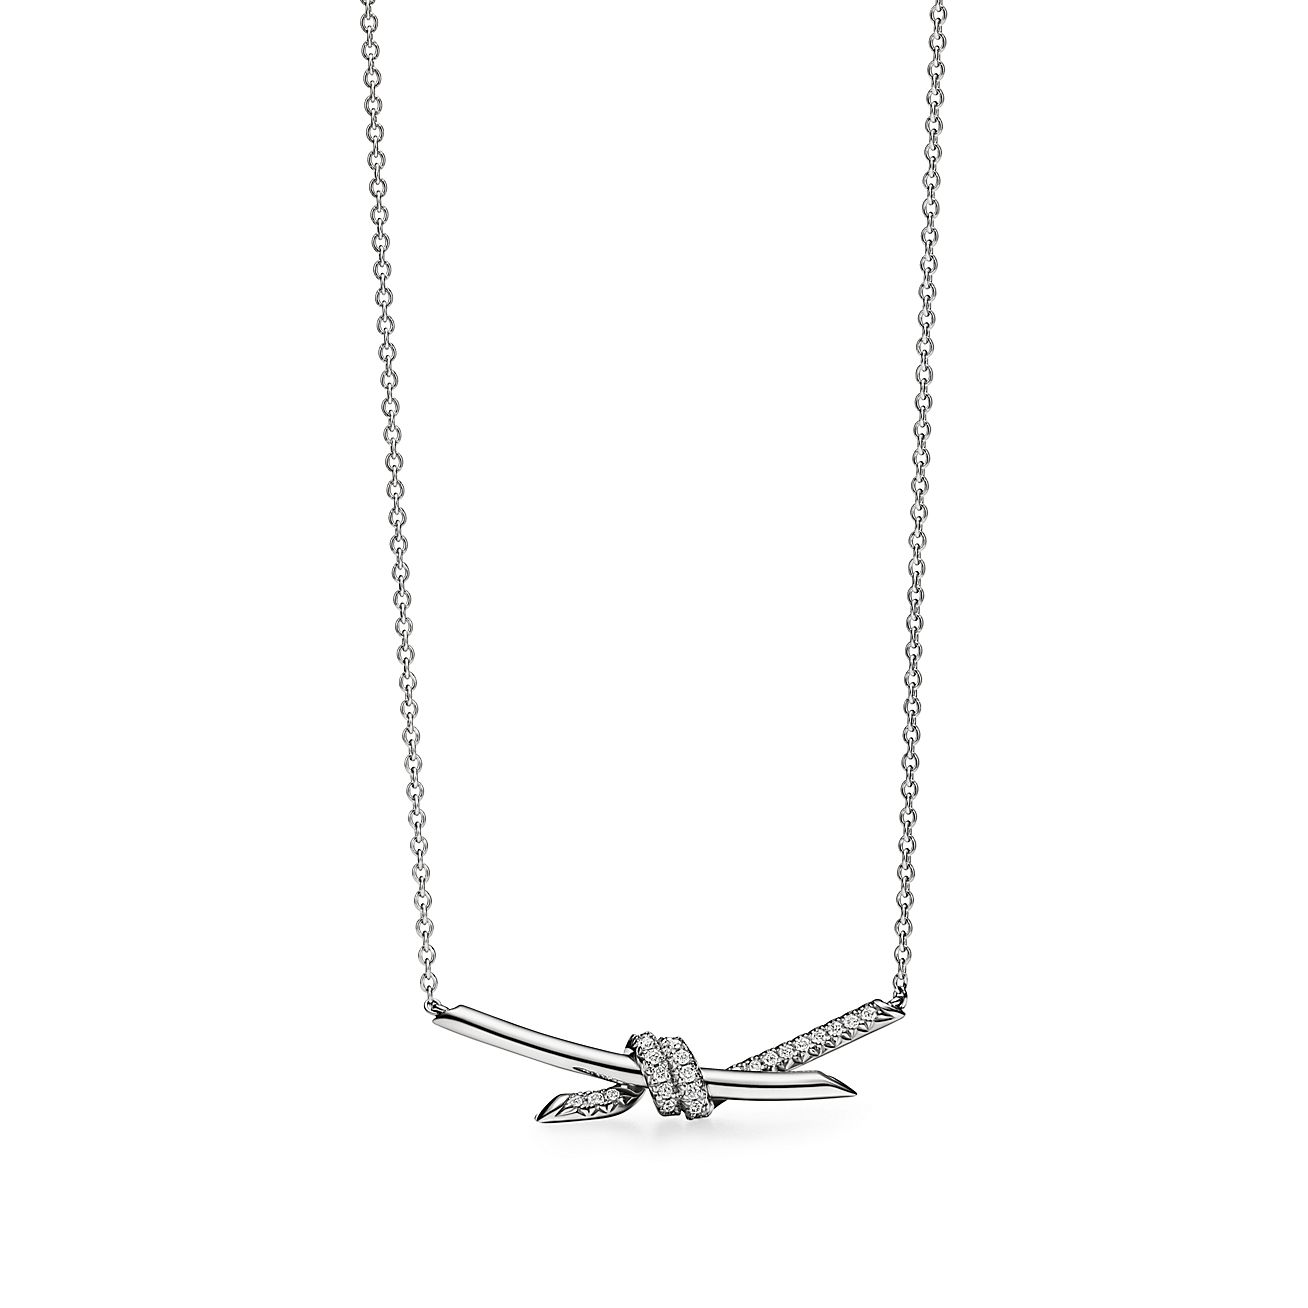 Tiffany Knot Pendant in White Gold with Diamonds | Tiffany & Co.